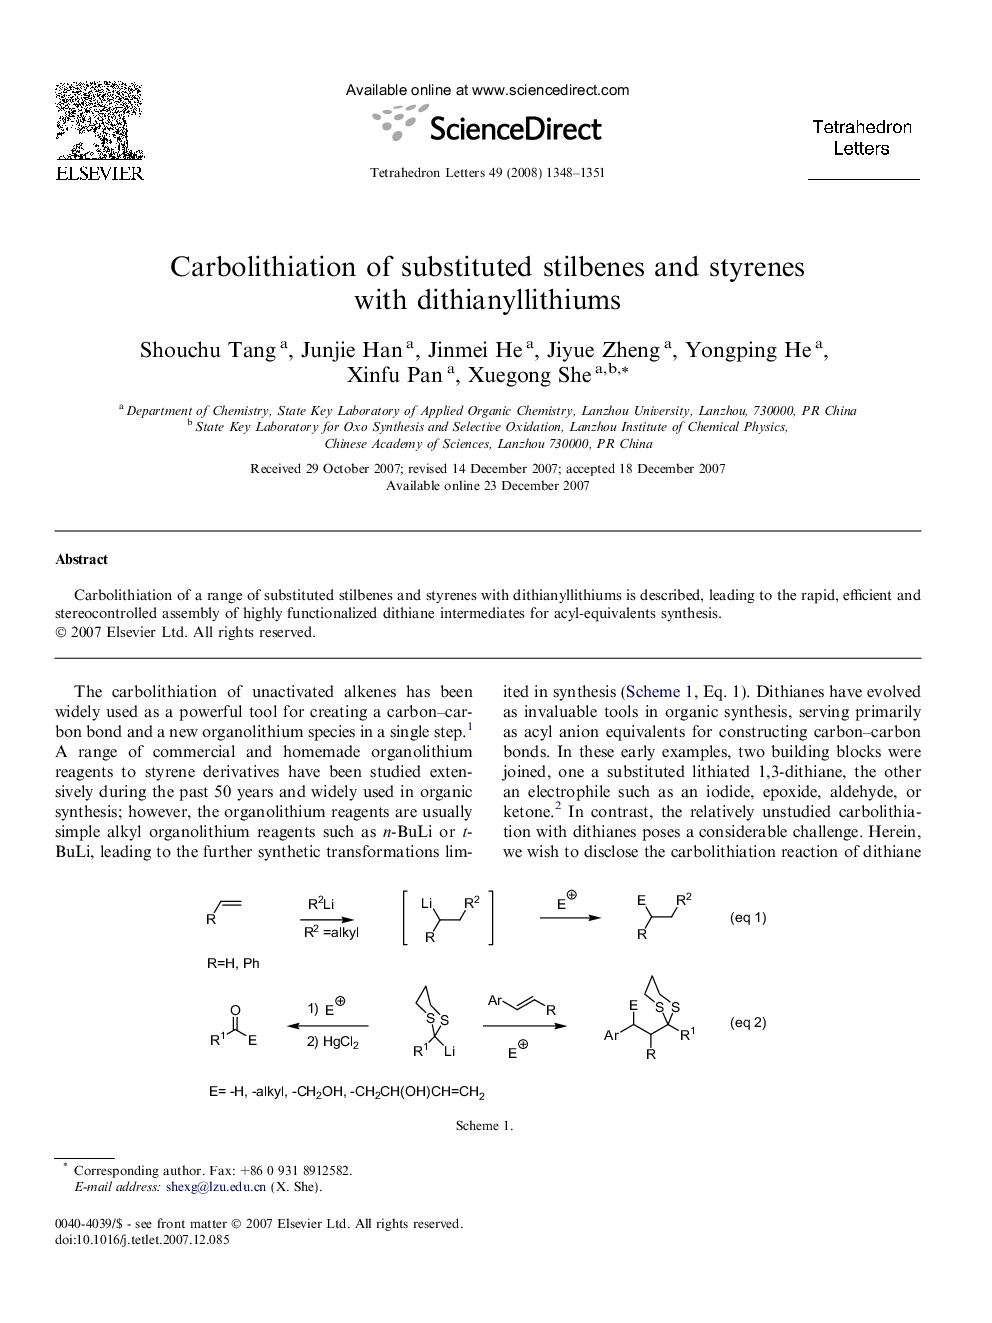 Carbolithiation of substituted stilbenes and styrenes with dithianyllithiums